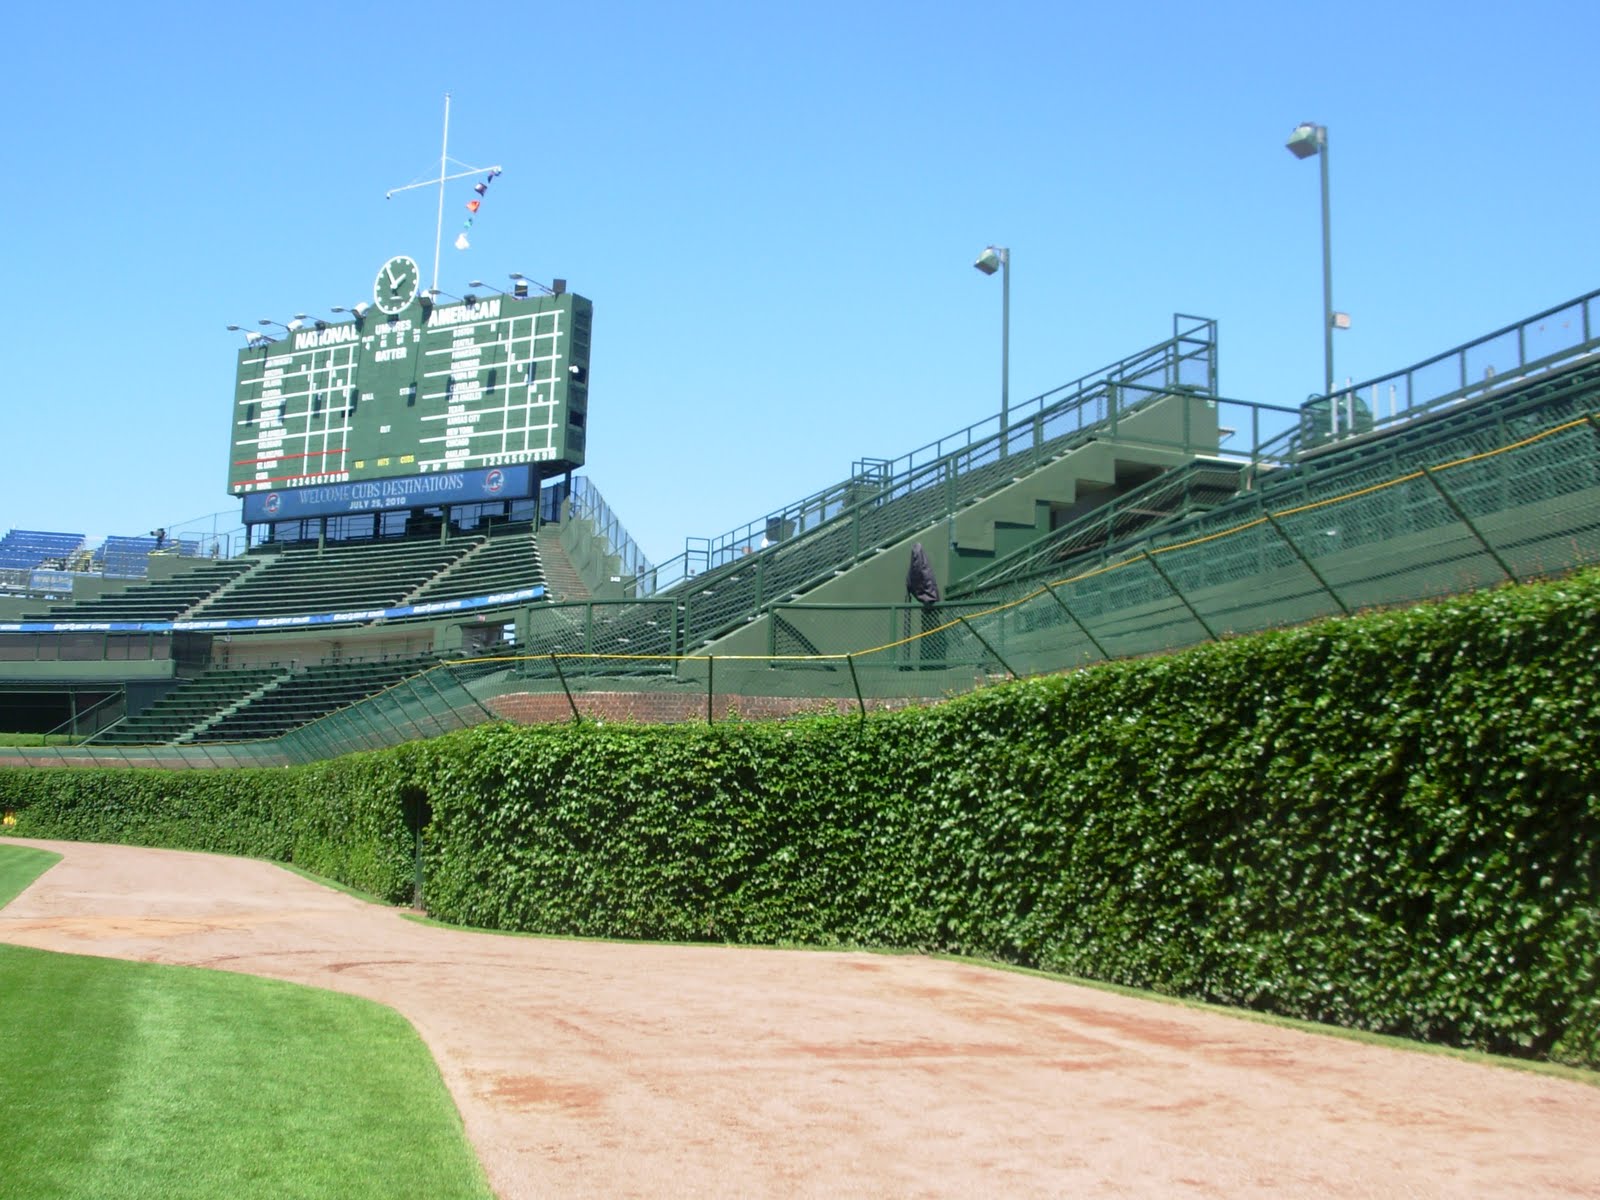 Wrigley Field Ivy We Walked To The Gorgeous